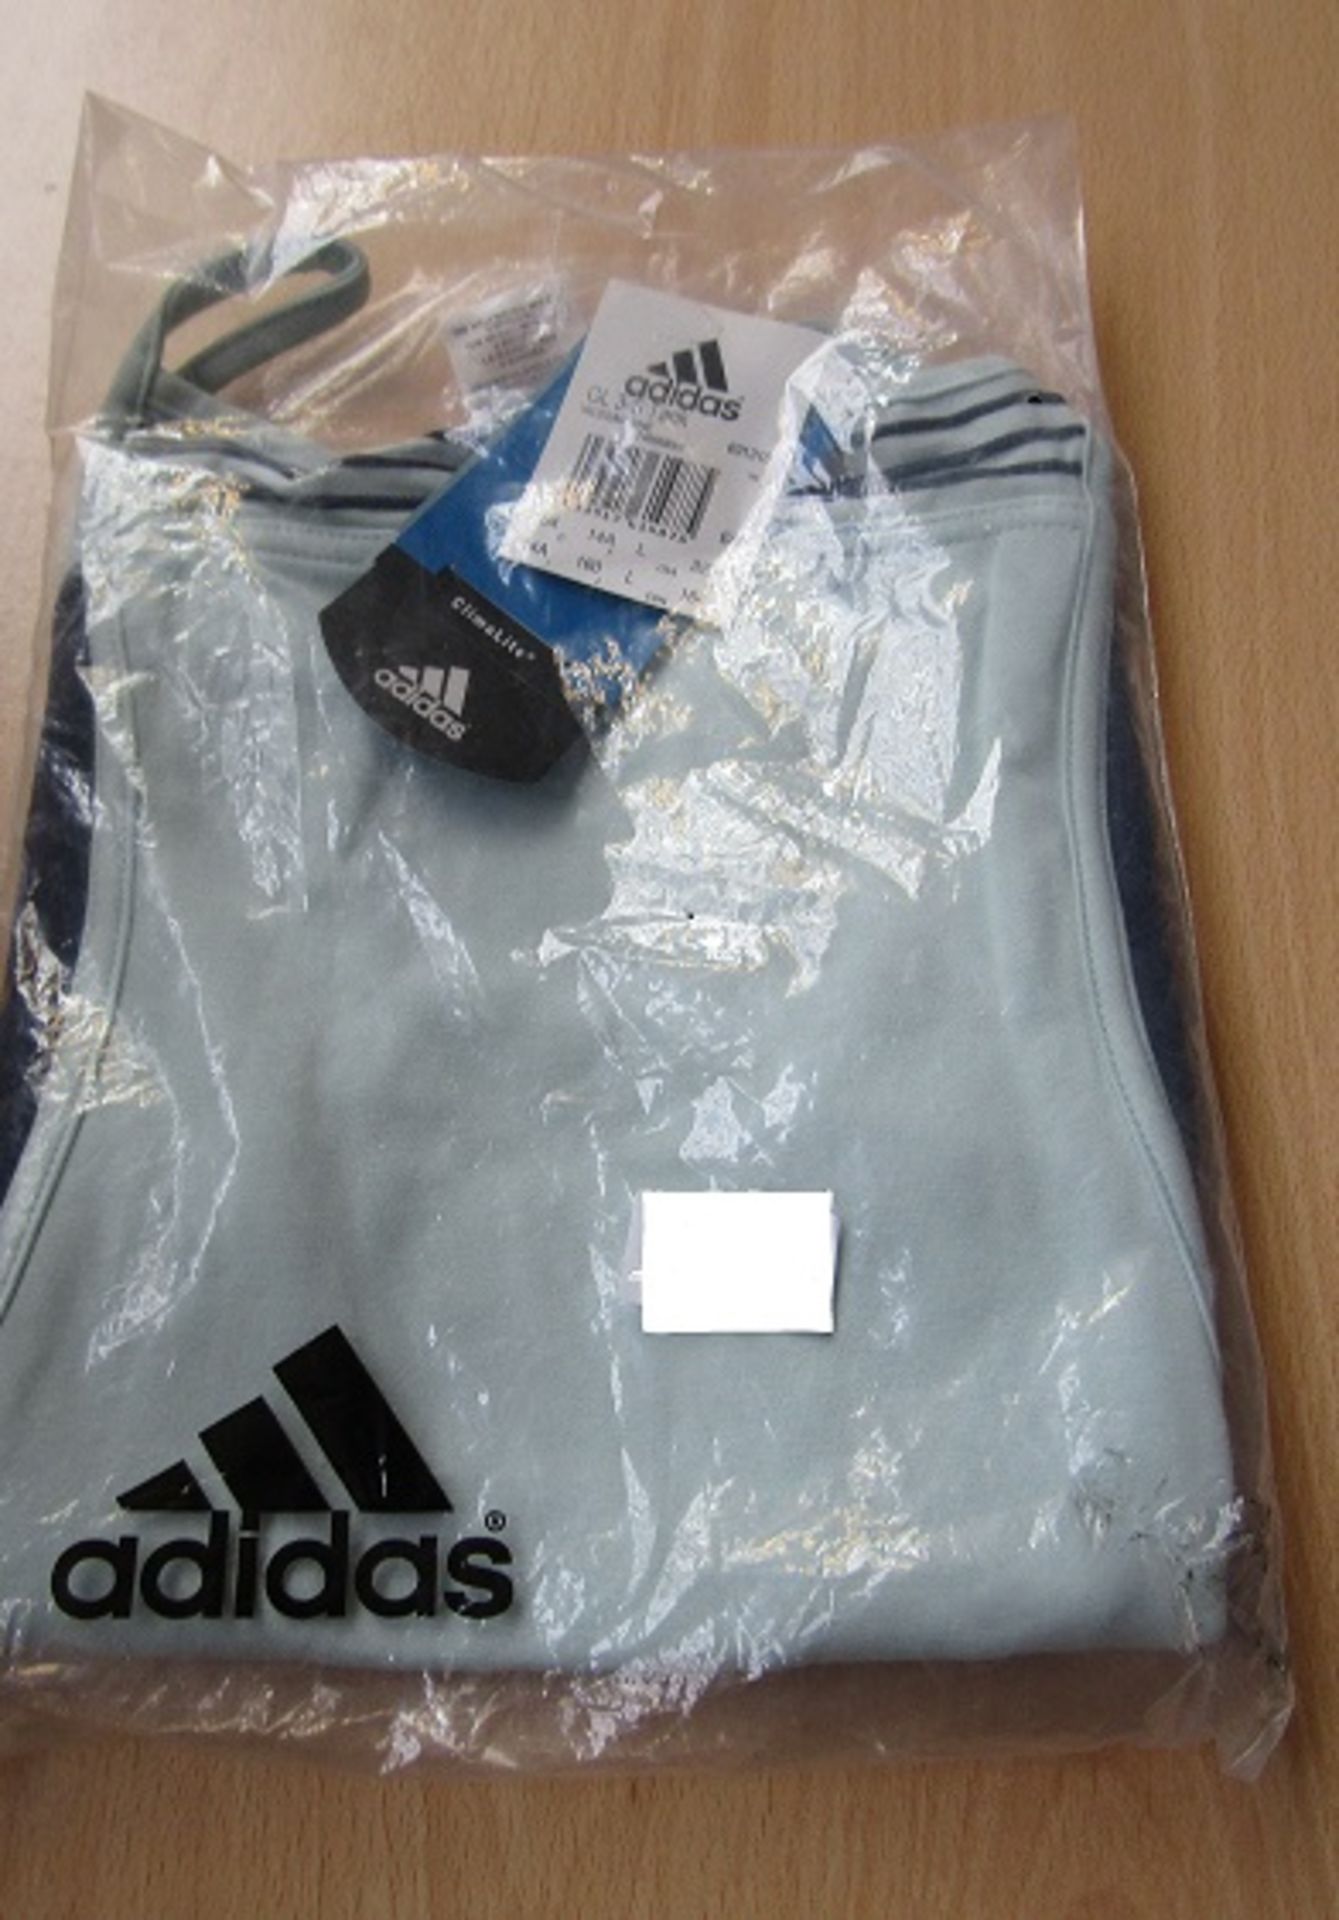 Brand New Adidas Climate Light Top size 32/34